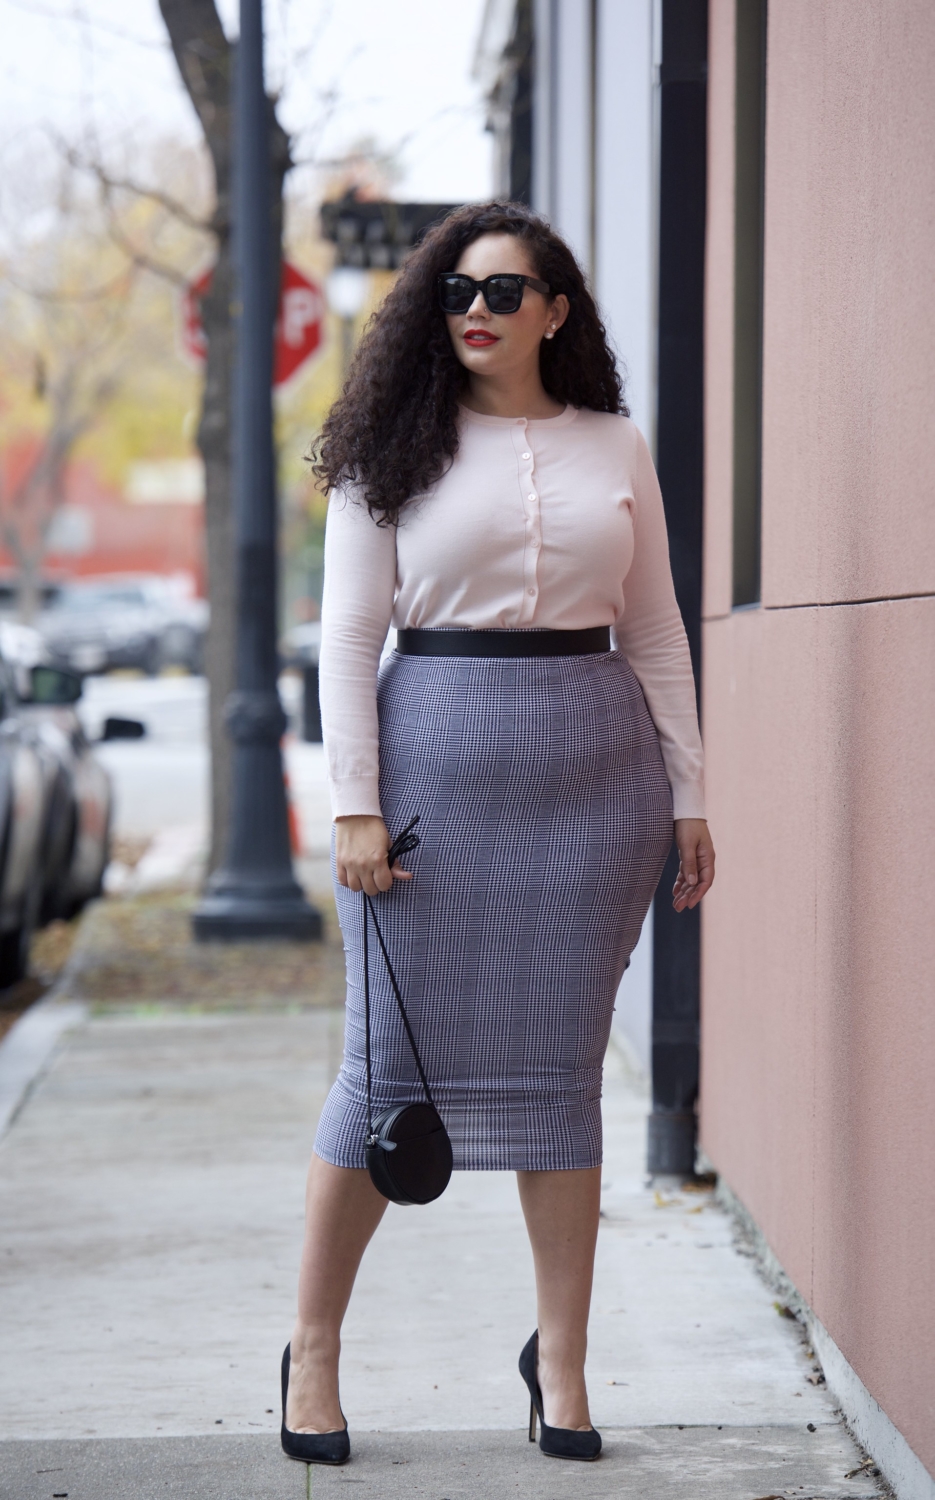 This Holiday Party Look is under $40 | Girl With Curves